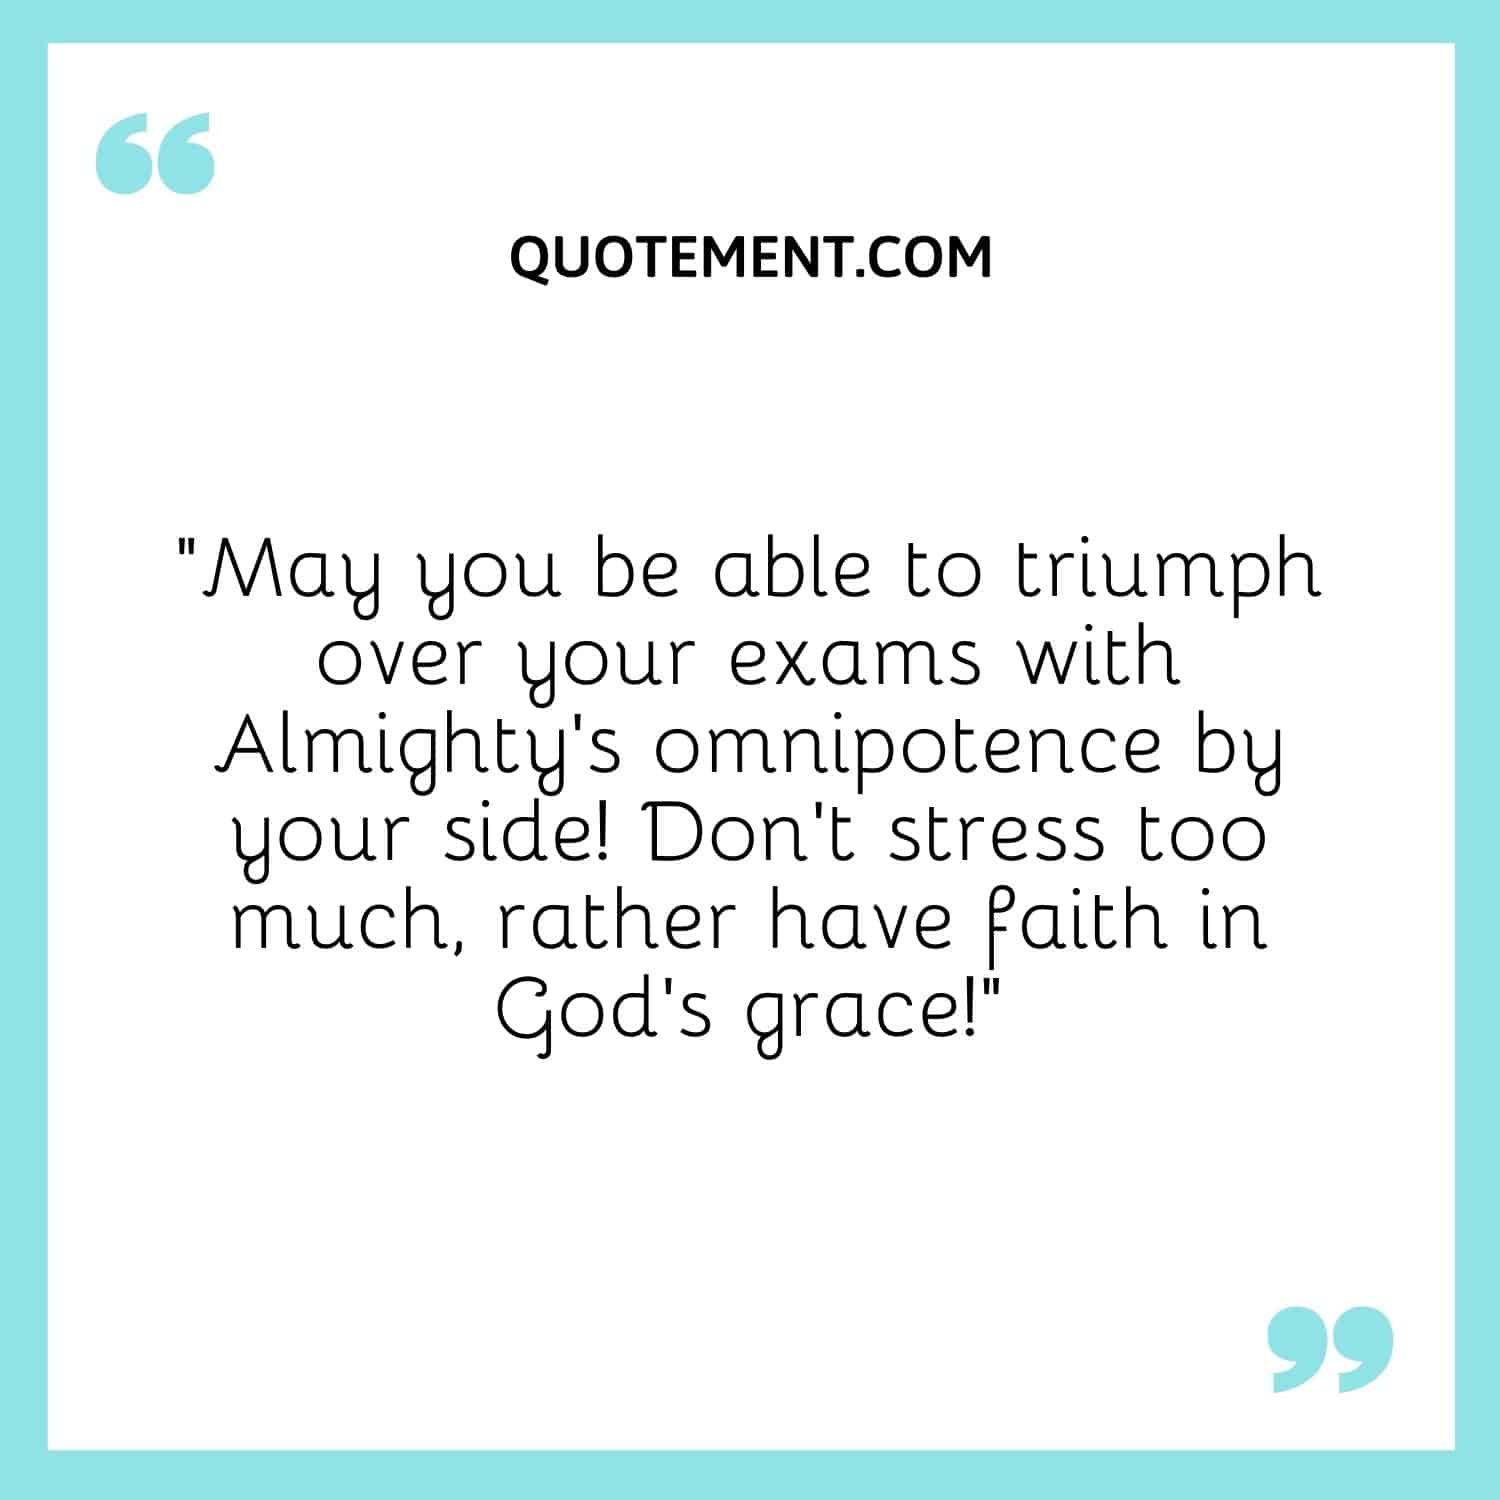 May you be able to triumph over your exams with Almighty's omnipotence by your side! (2)